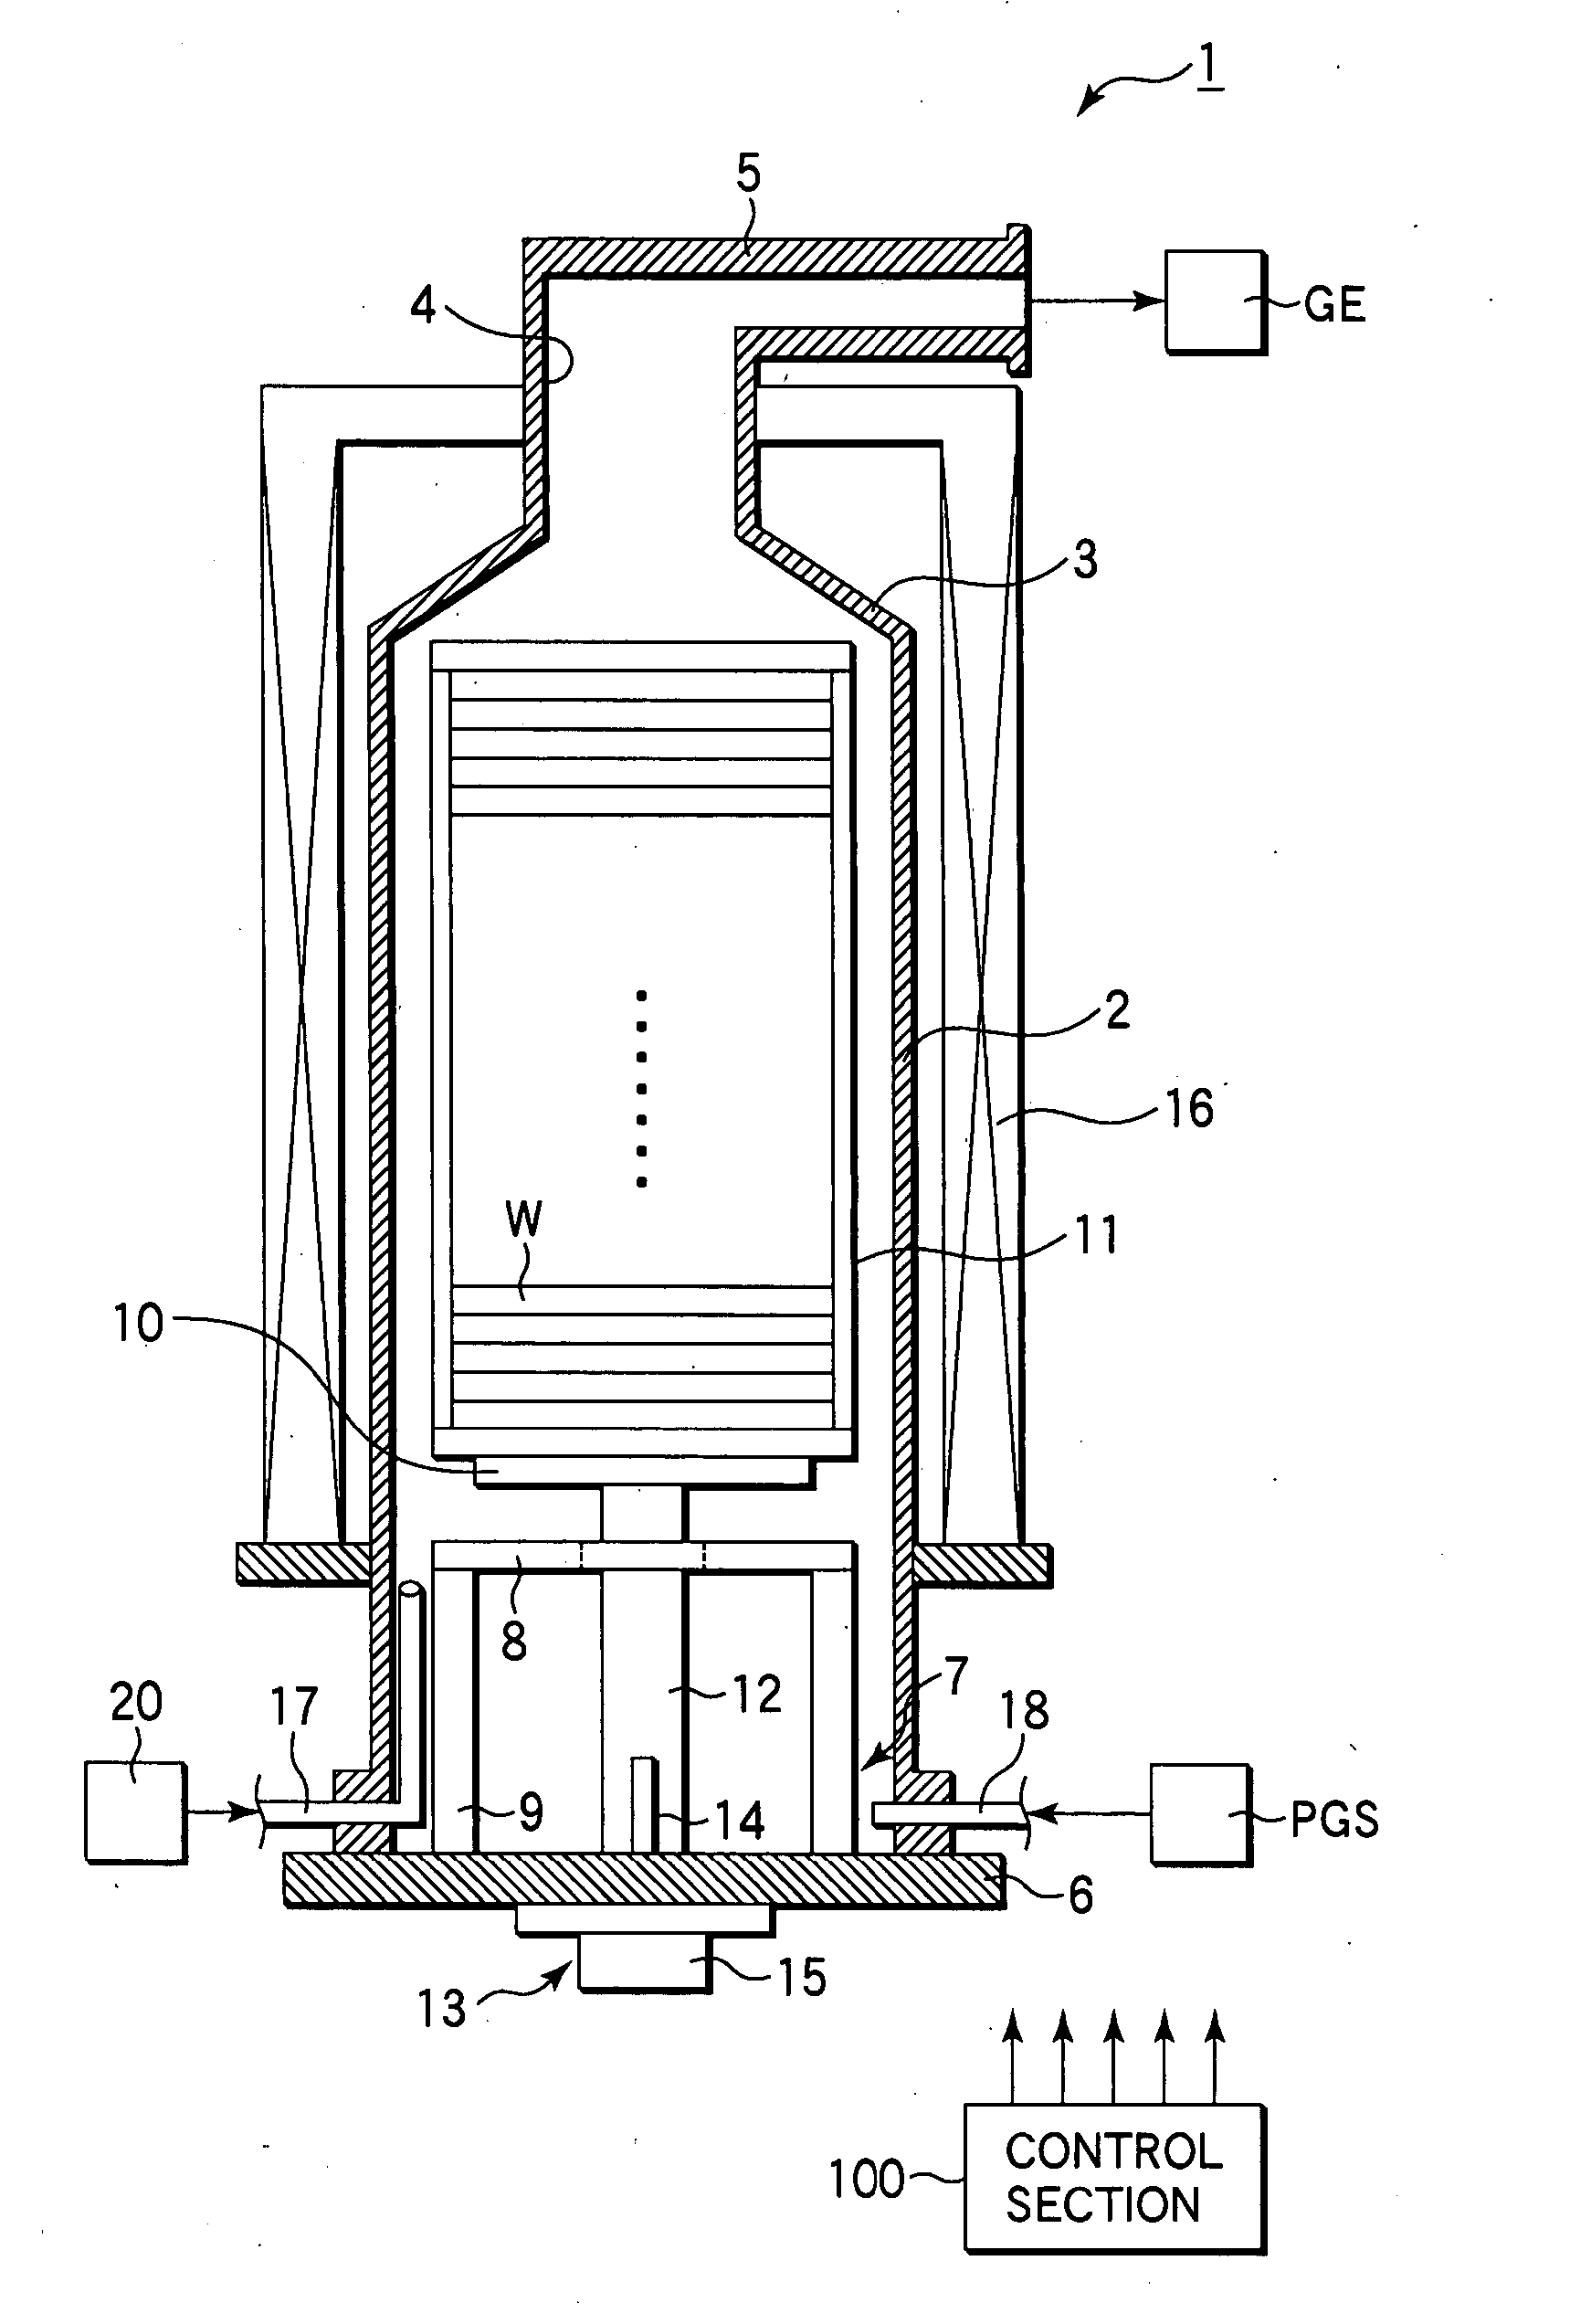 Film formation apparatus for semiconductor process and method for using the same